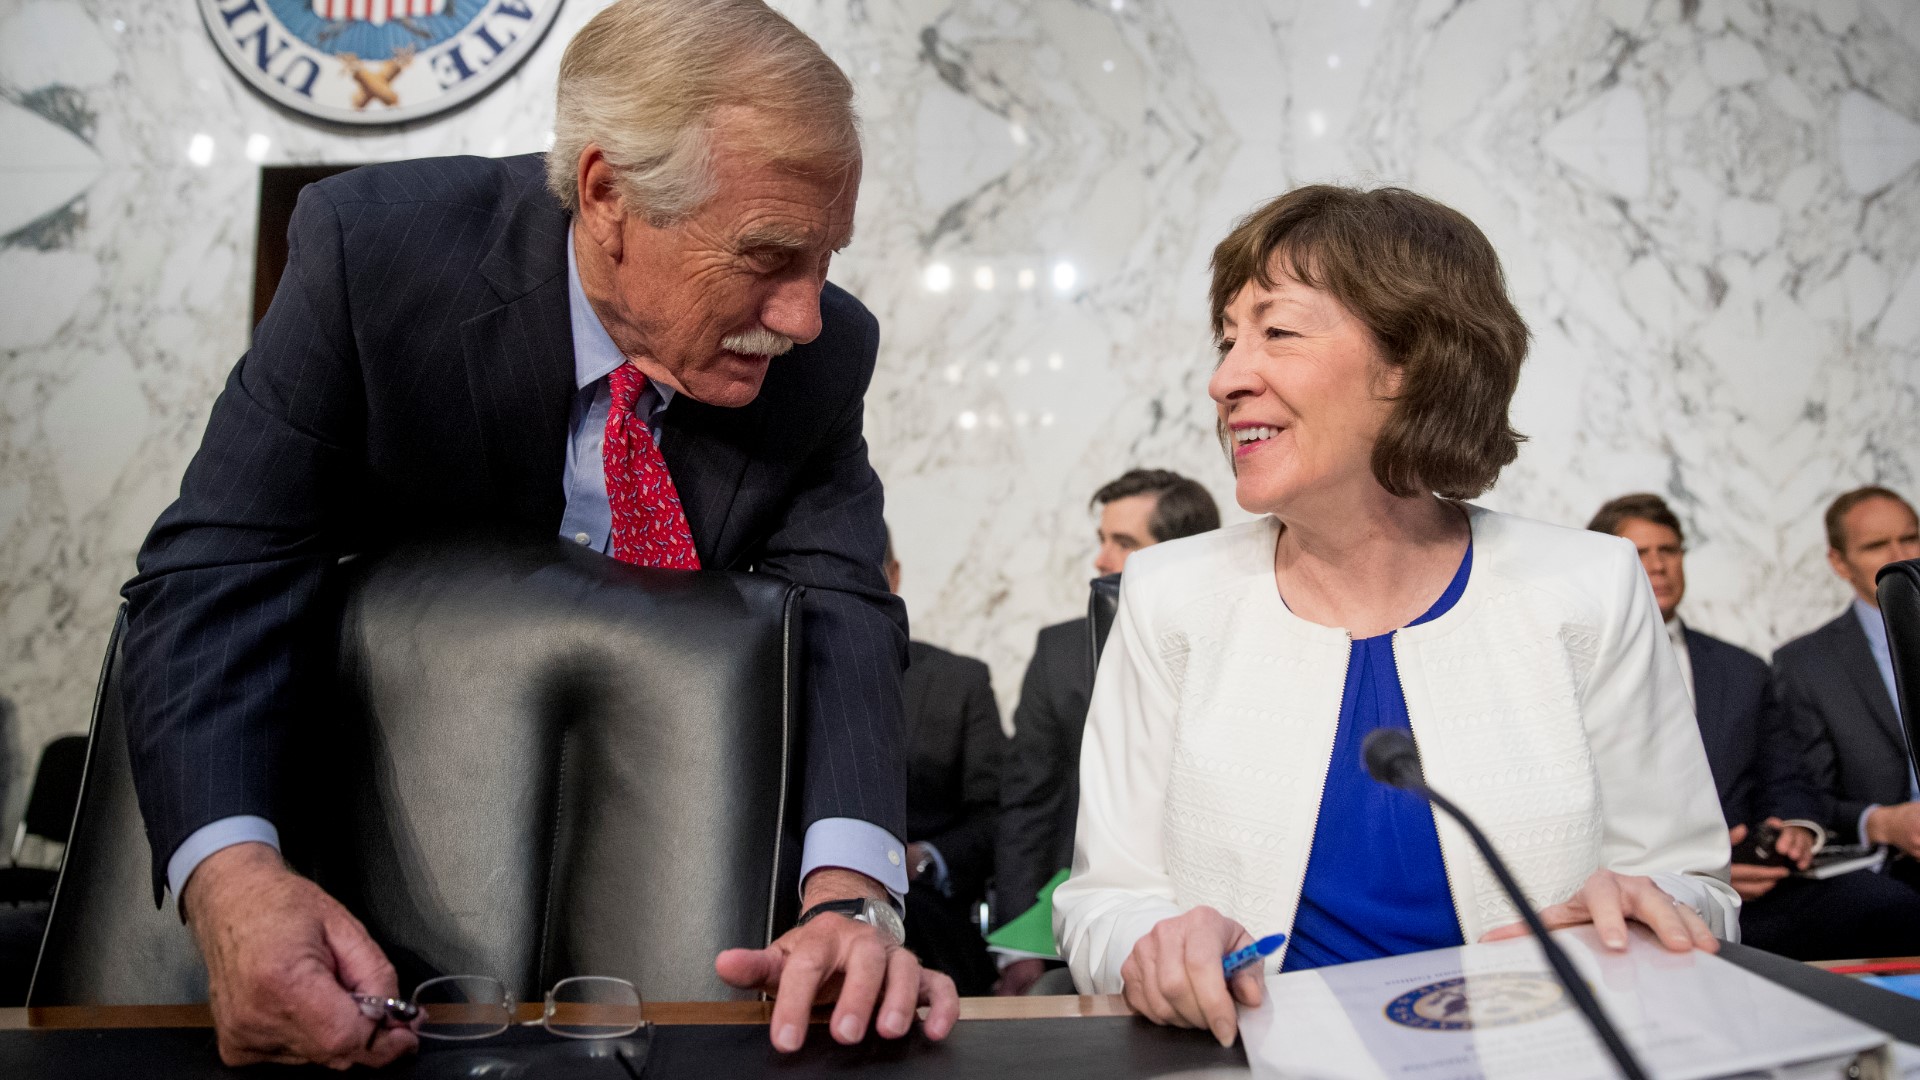 Maine Senators Susan Collins and Angus King are both looking to allow witnesses at the impeachment trial that could start in the coming days.